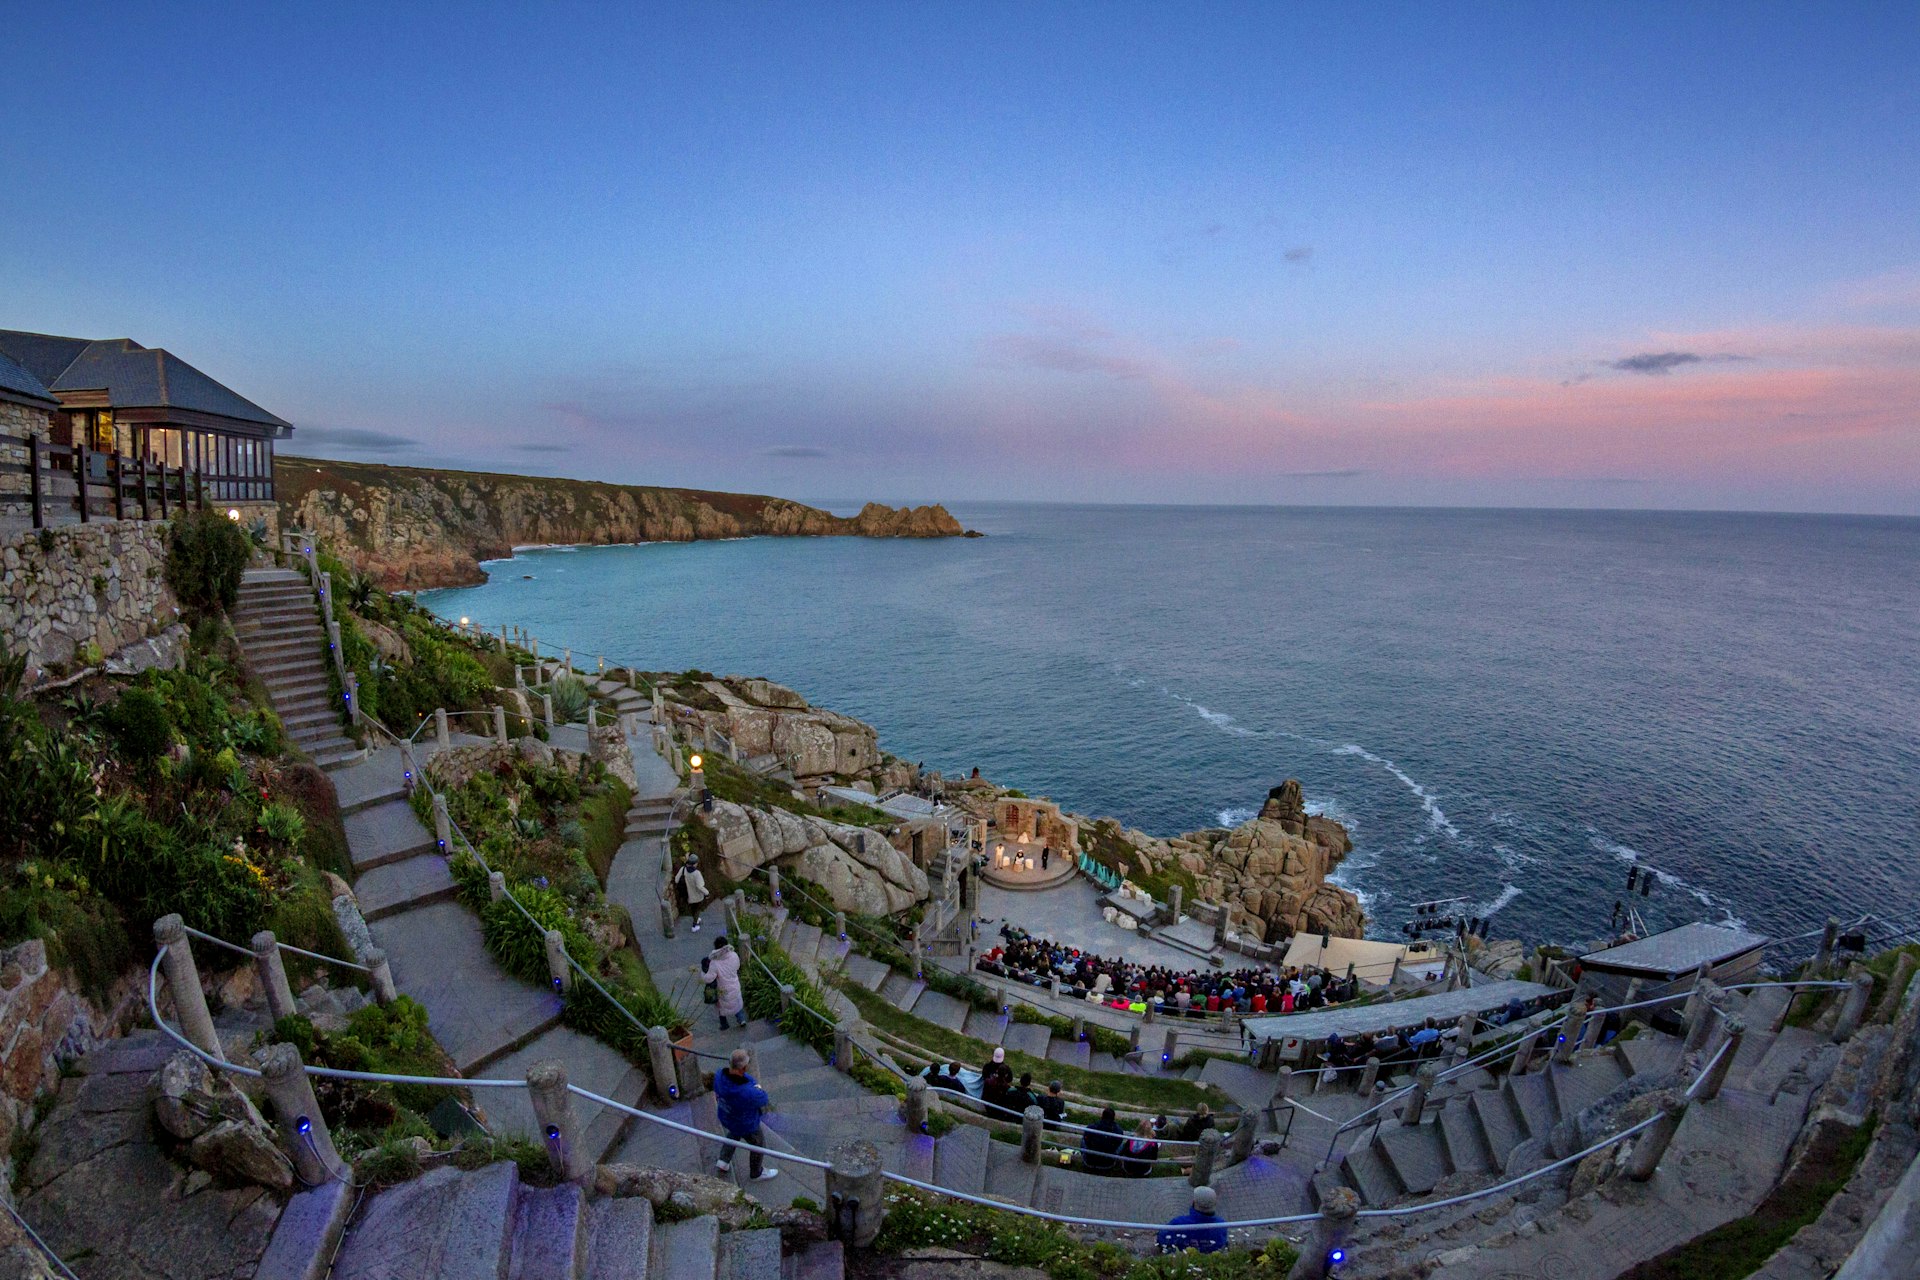 Steps lead down to the open-air Minack Theatre in Penzance; it's sunset, and the Atlantic Ocean can be seen beyond the cliff-top performance.